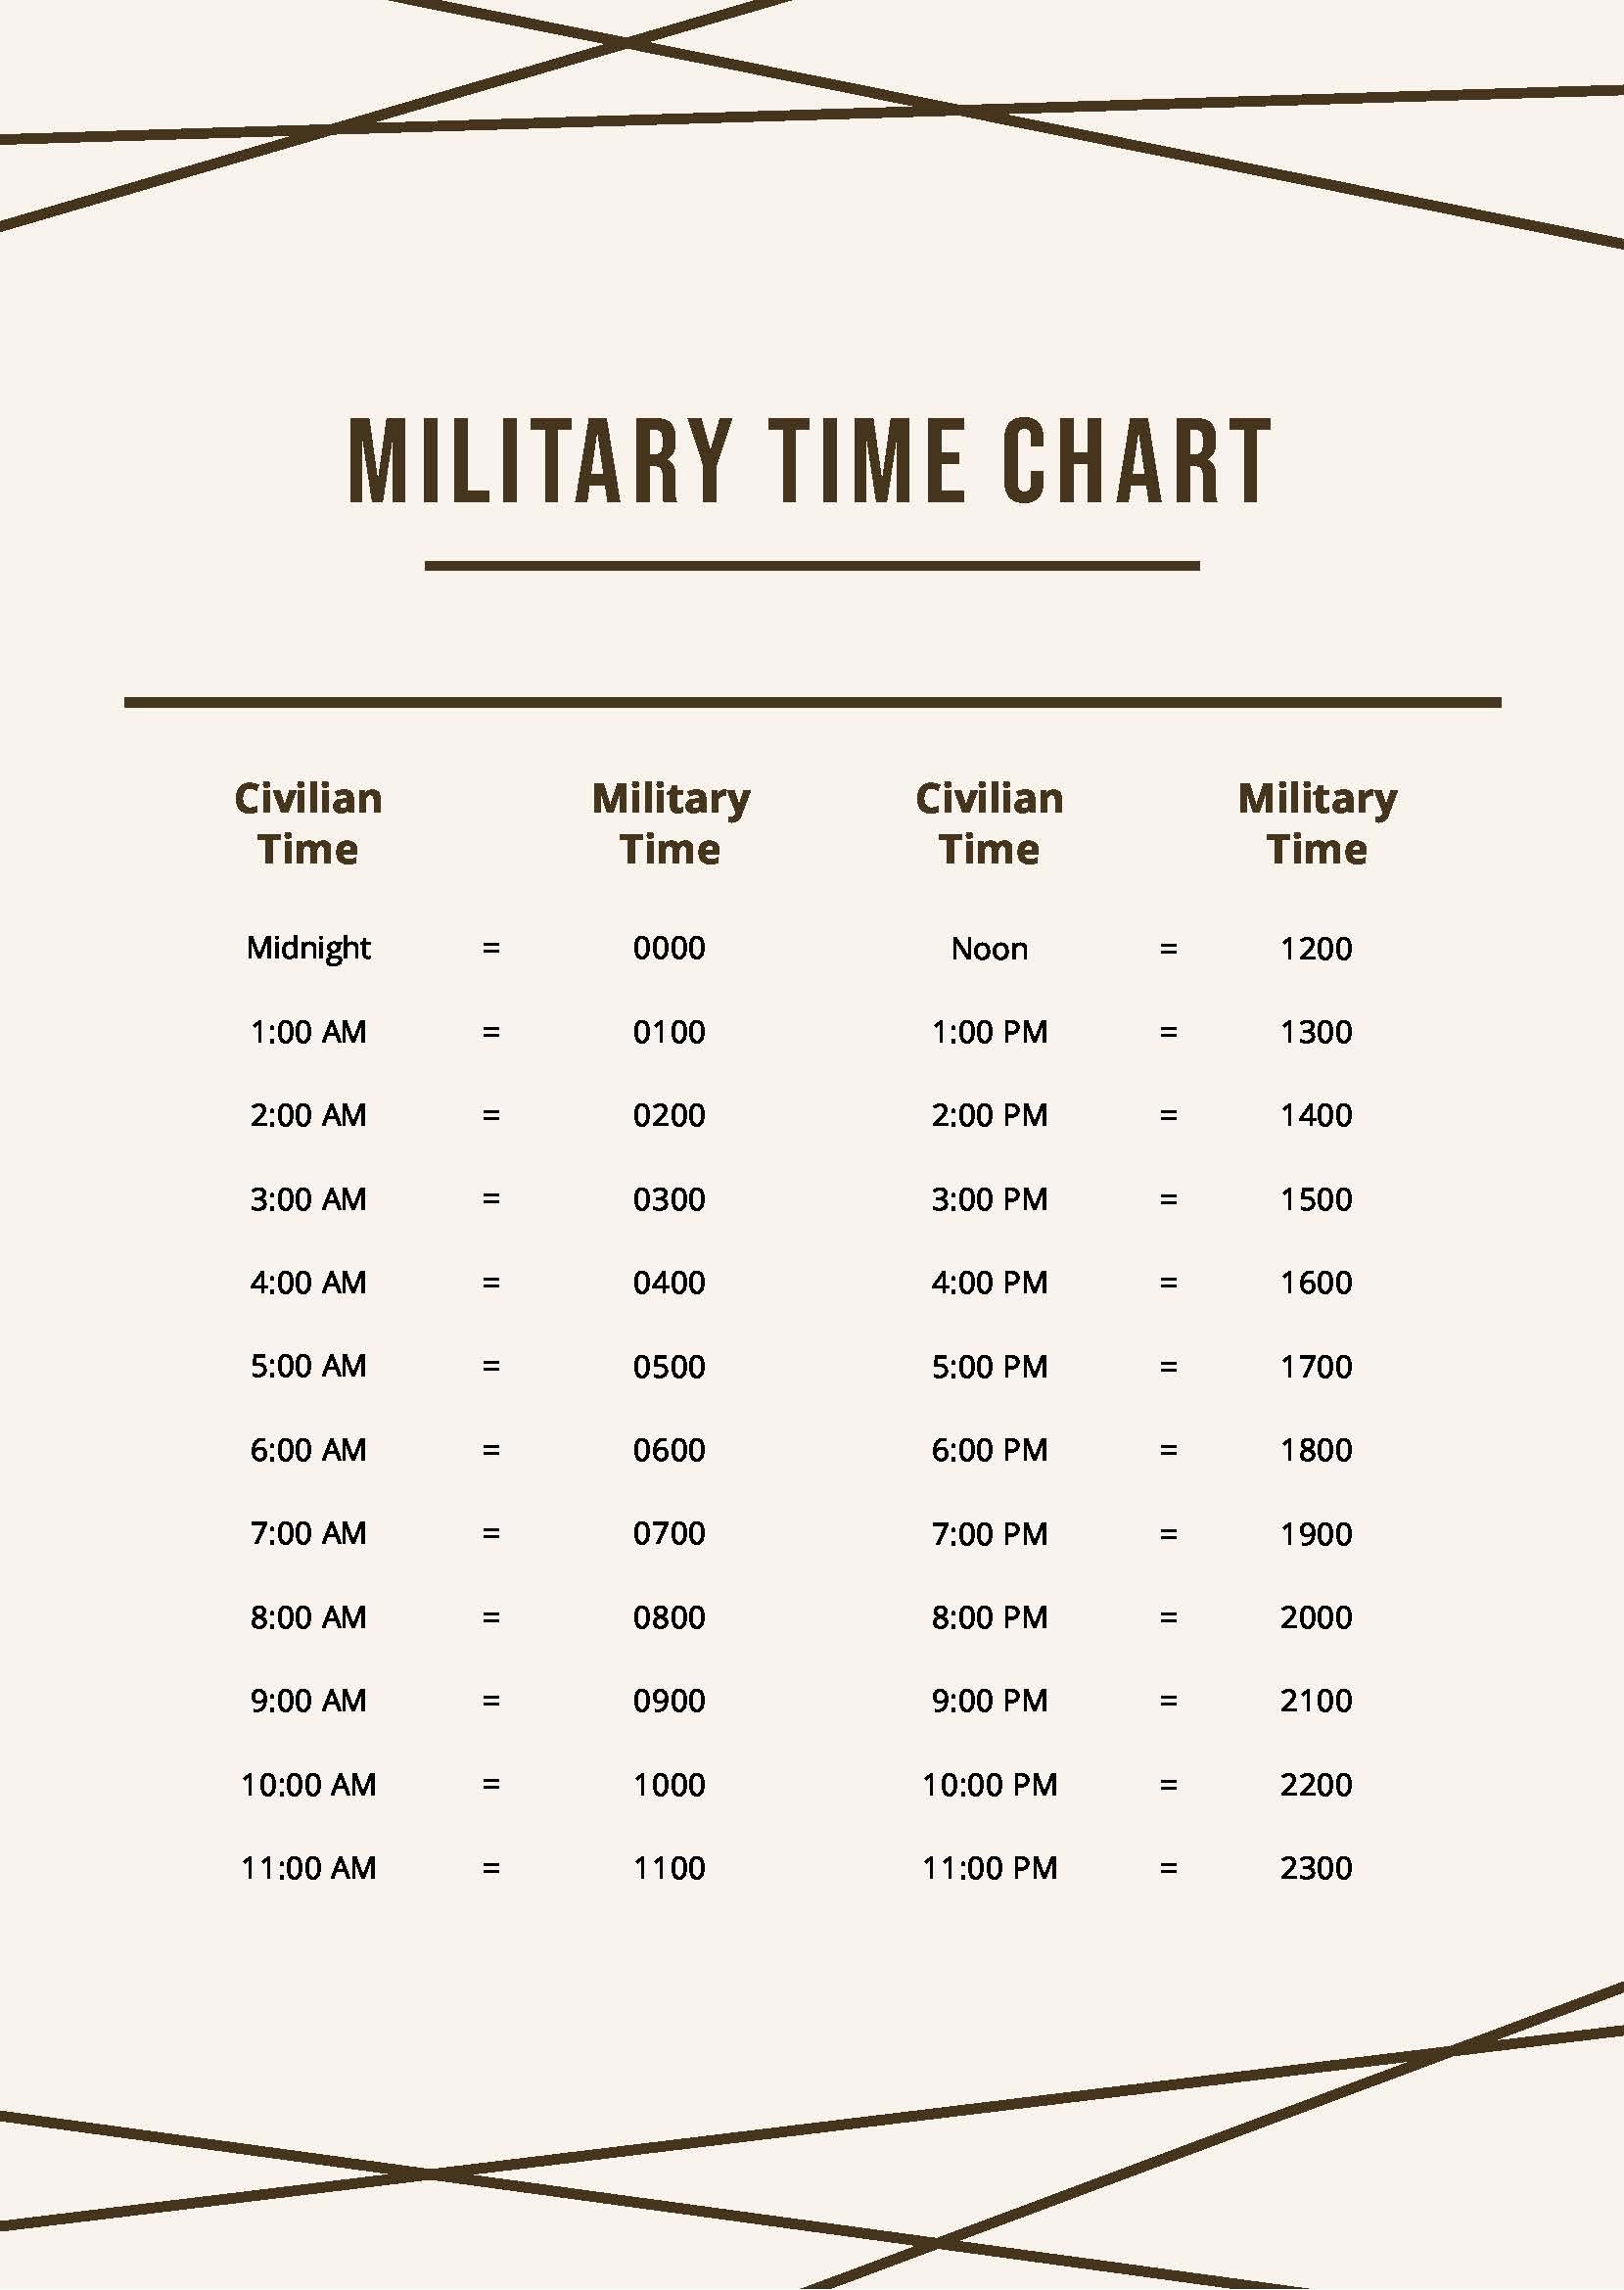 7-best-images-of-24-hour-time-chart-printable-24-hour-military-time-chart-military-time